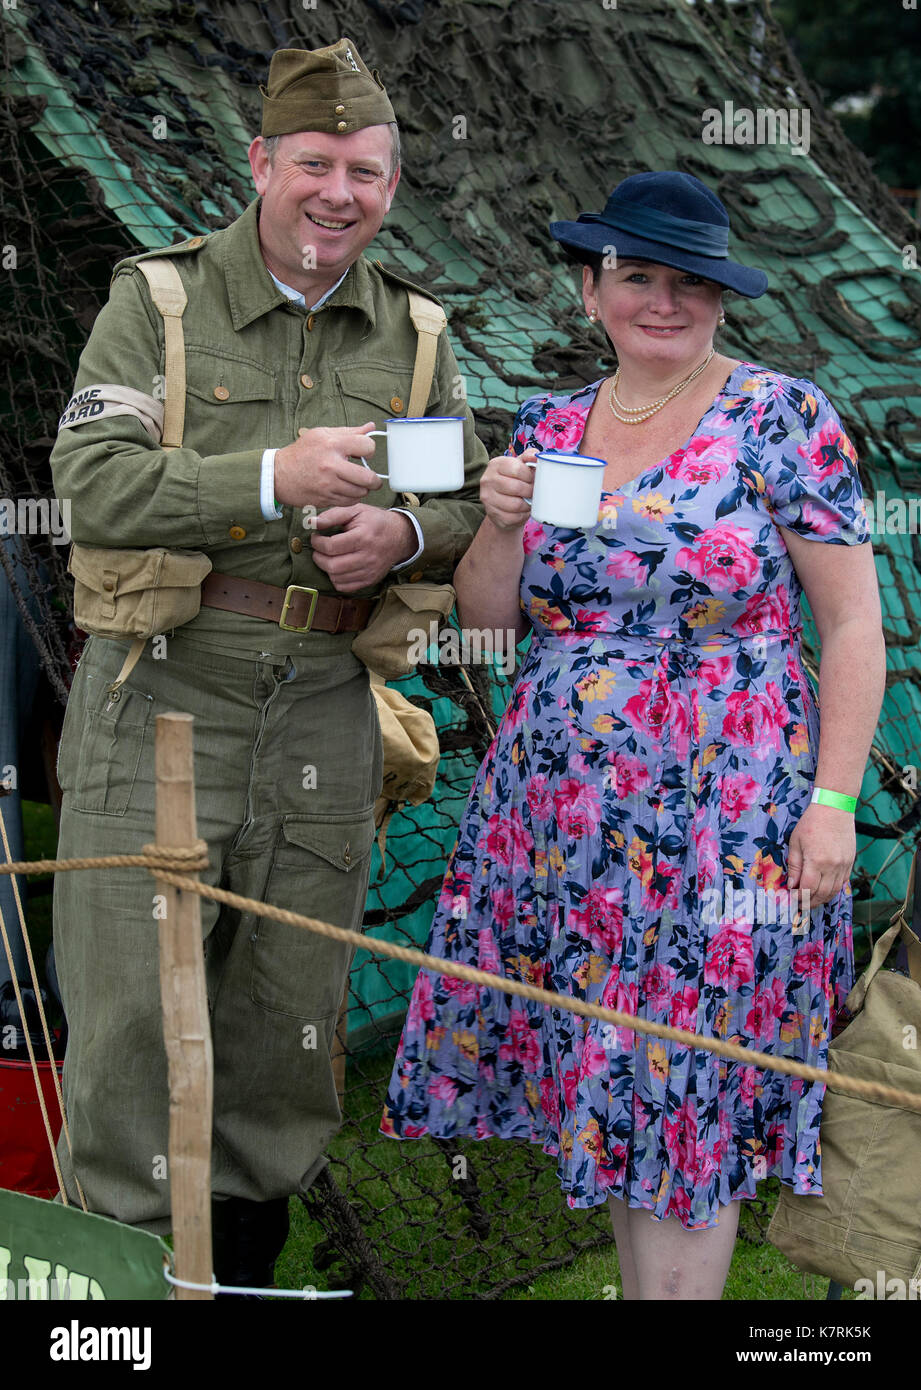 Chatham, Kent, UK. 17 September 2017.War time family Deborah Dean and Colin Taylor of Barming, Kent, are members of the Barmy Army Film Club, making Dad’s Army inspired films, today bringing the past to life with 1940s period dress and world war 2 era cars and planes at the Salute to the 40’s Vintage Weekend at Chatham Historic Dockyard. © Matthew Richardson/Alamy Live News Stock Photo